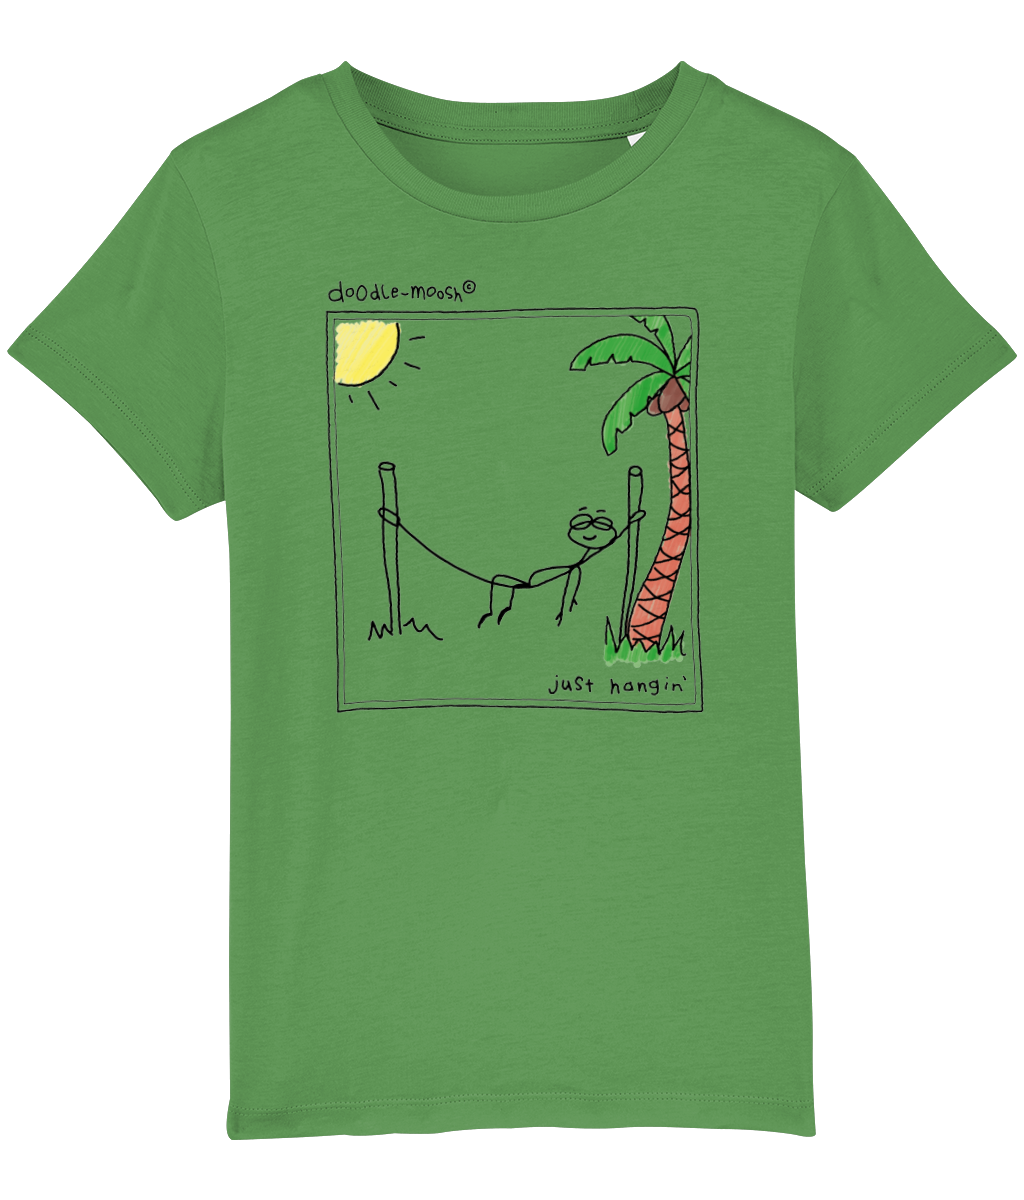 Just hanging t-shirt, green with black, colourful drawing